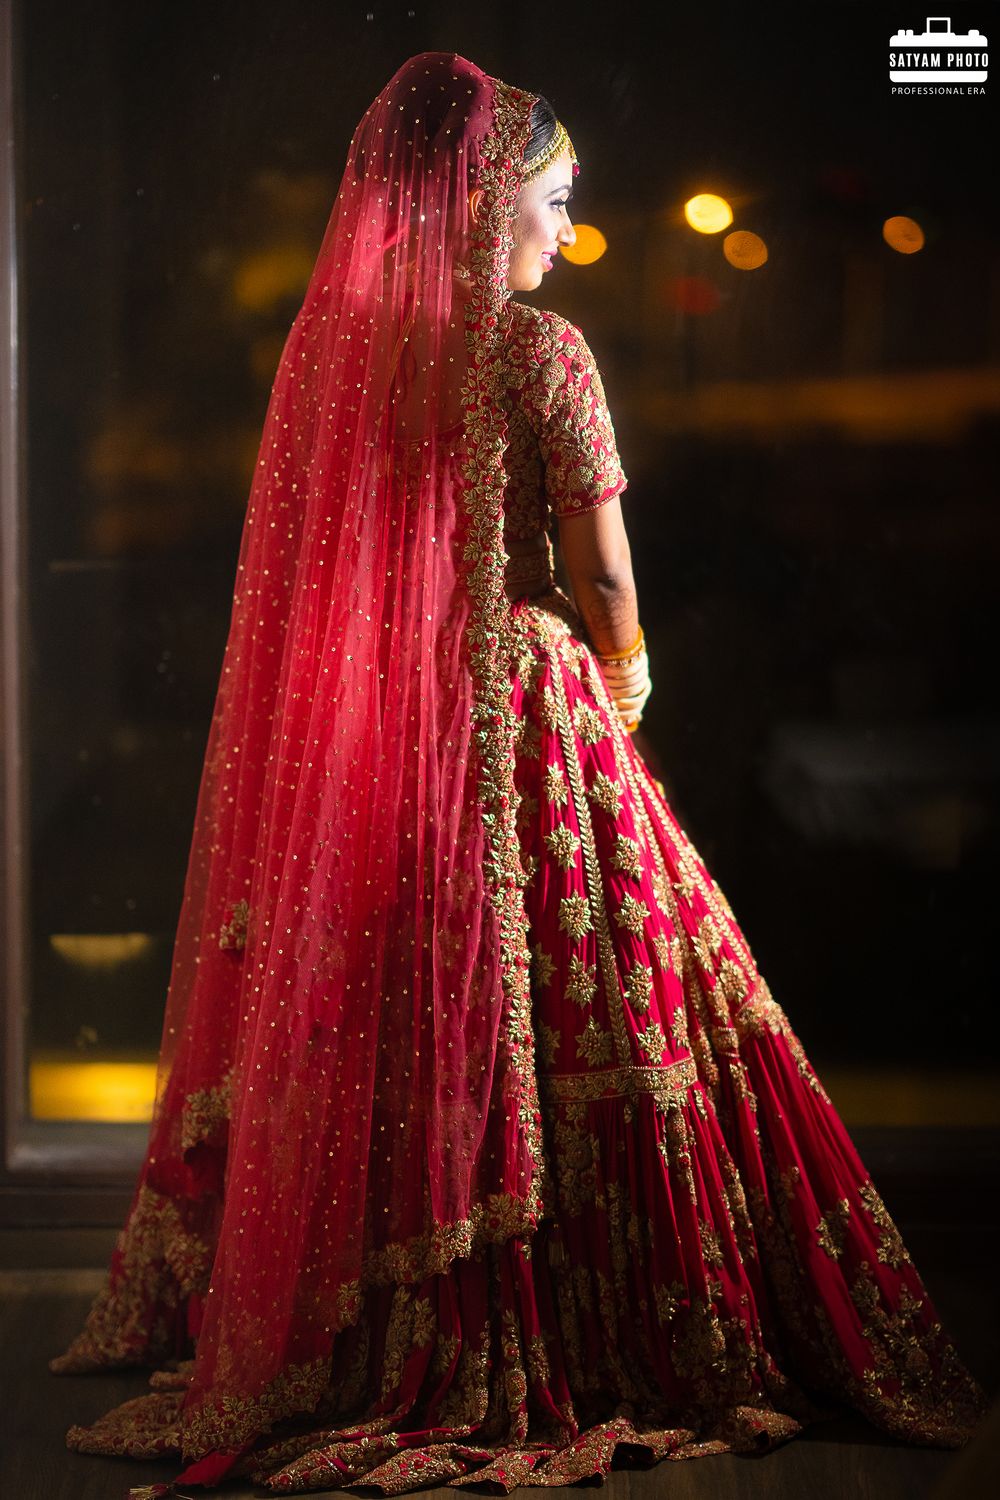 Photo From Bridal s - By Satyam Photo